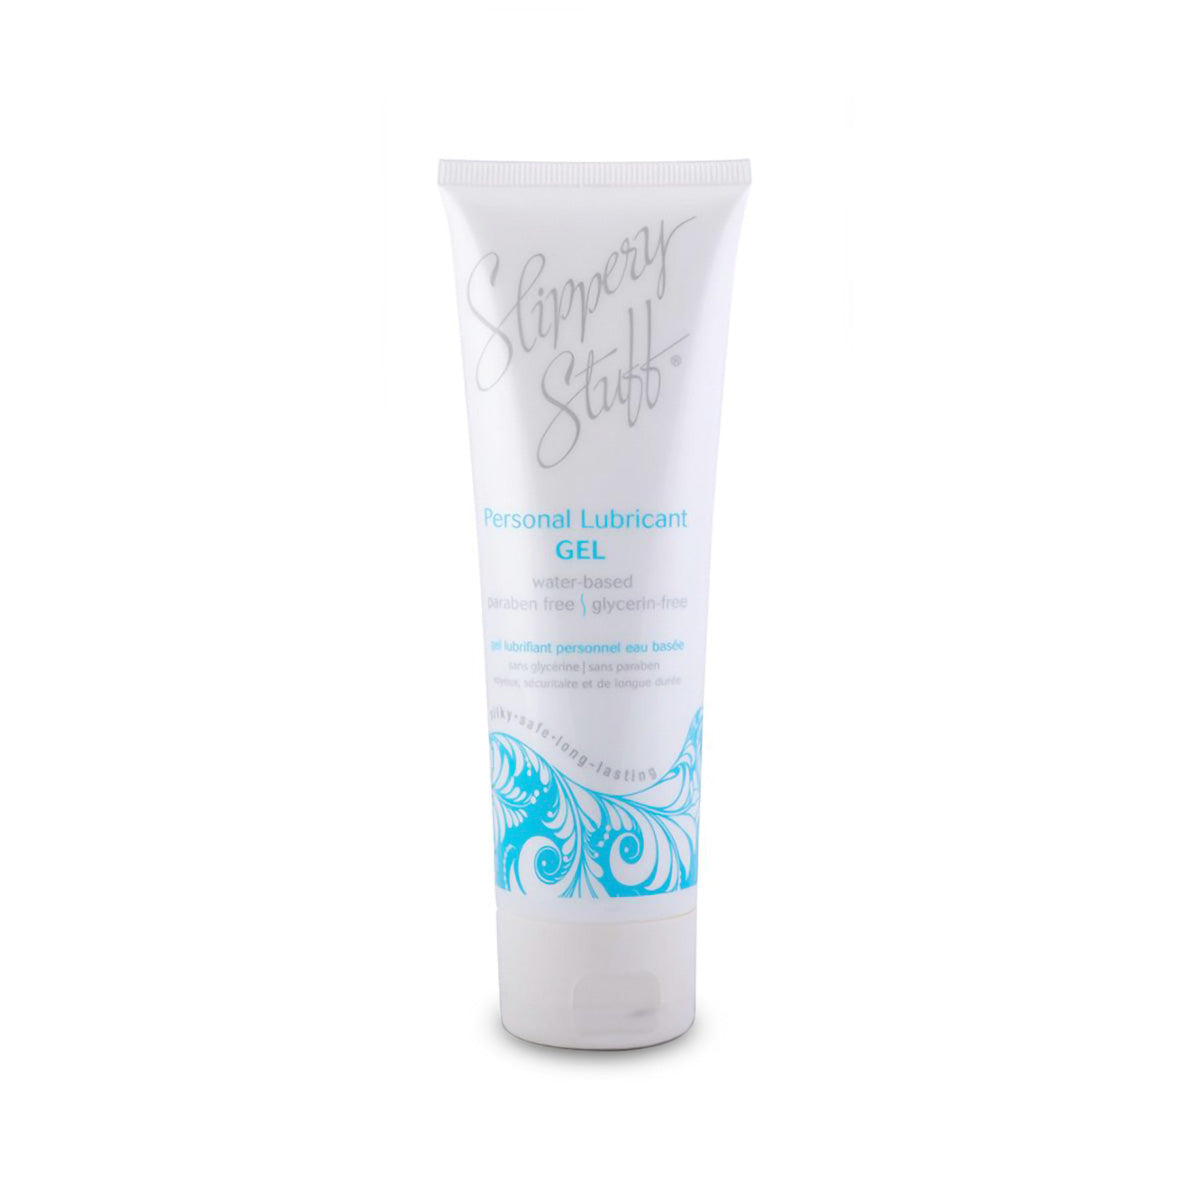 Slippery Stuff Gel Water Based Personal Lubricant Lube 4oz Travel Size